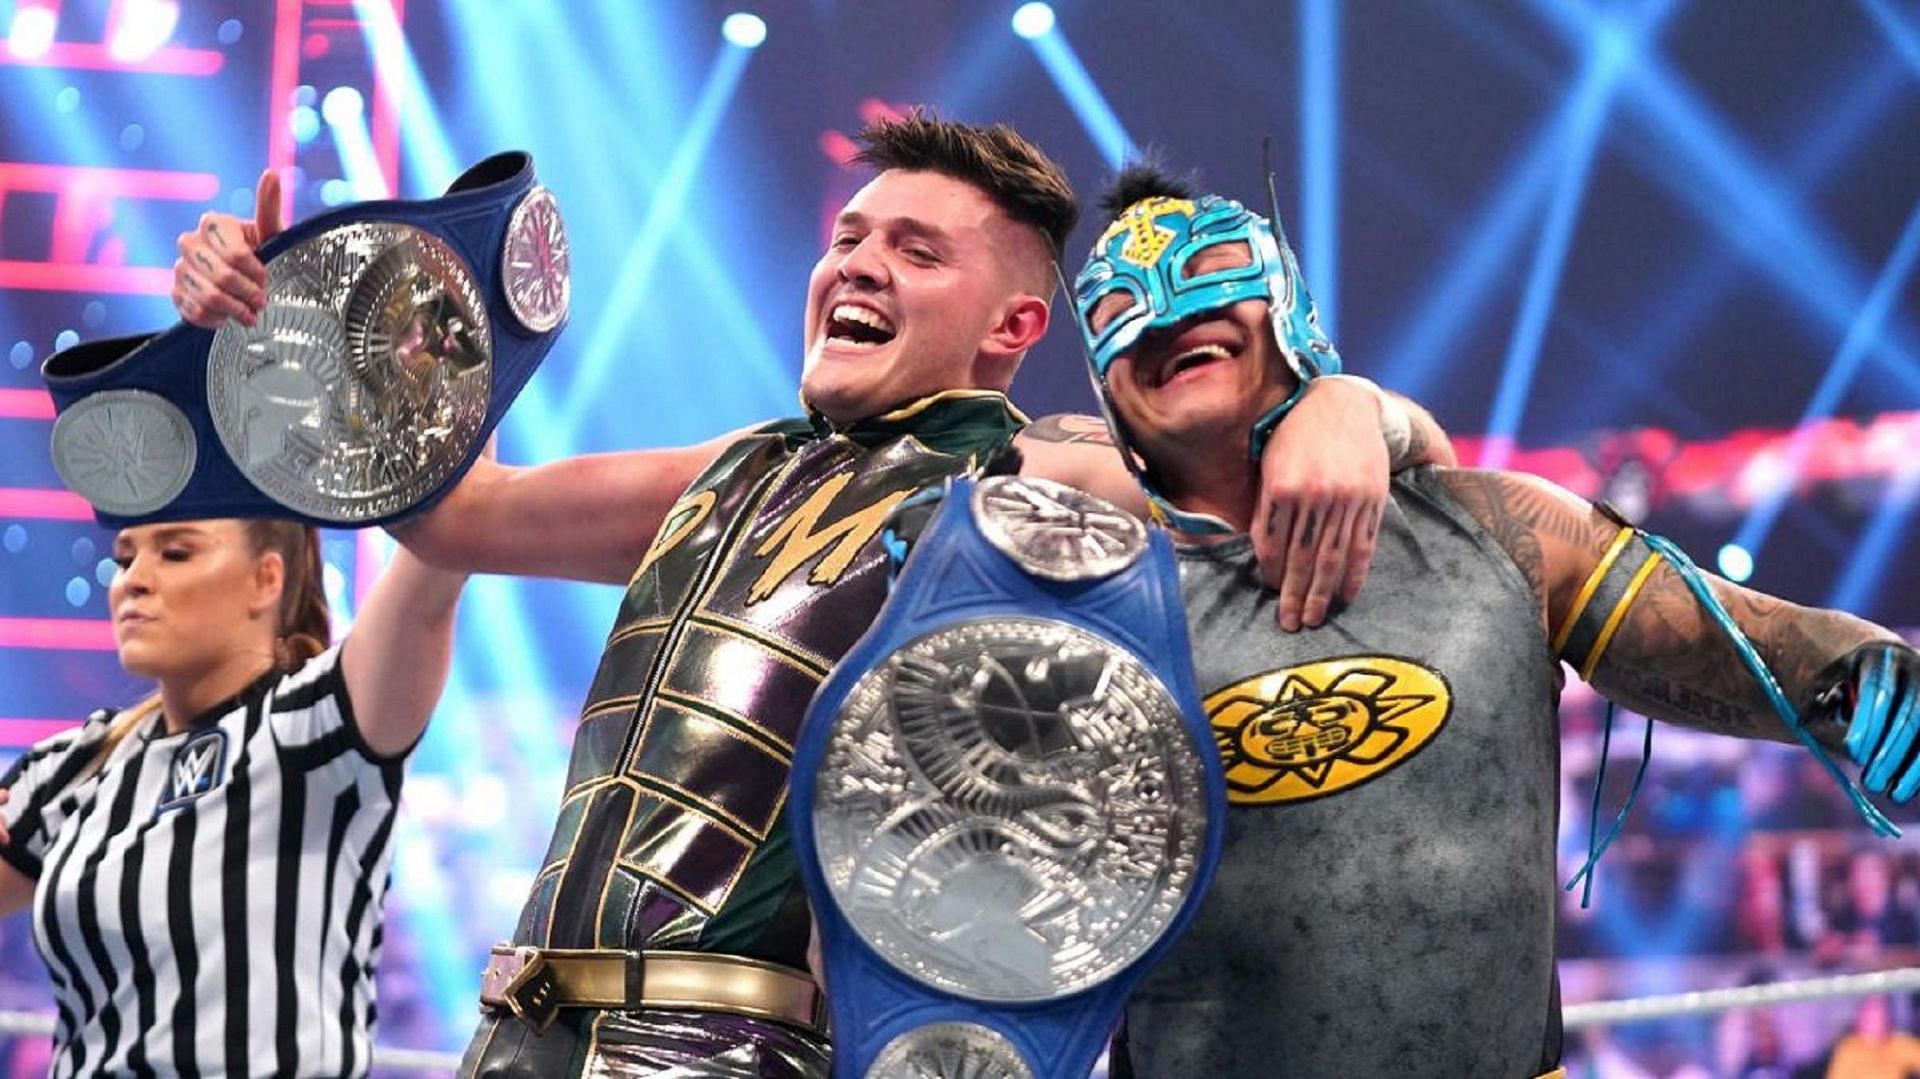 Happier days for Dominik and Rey Mysterio